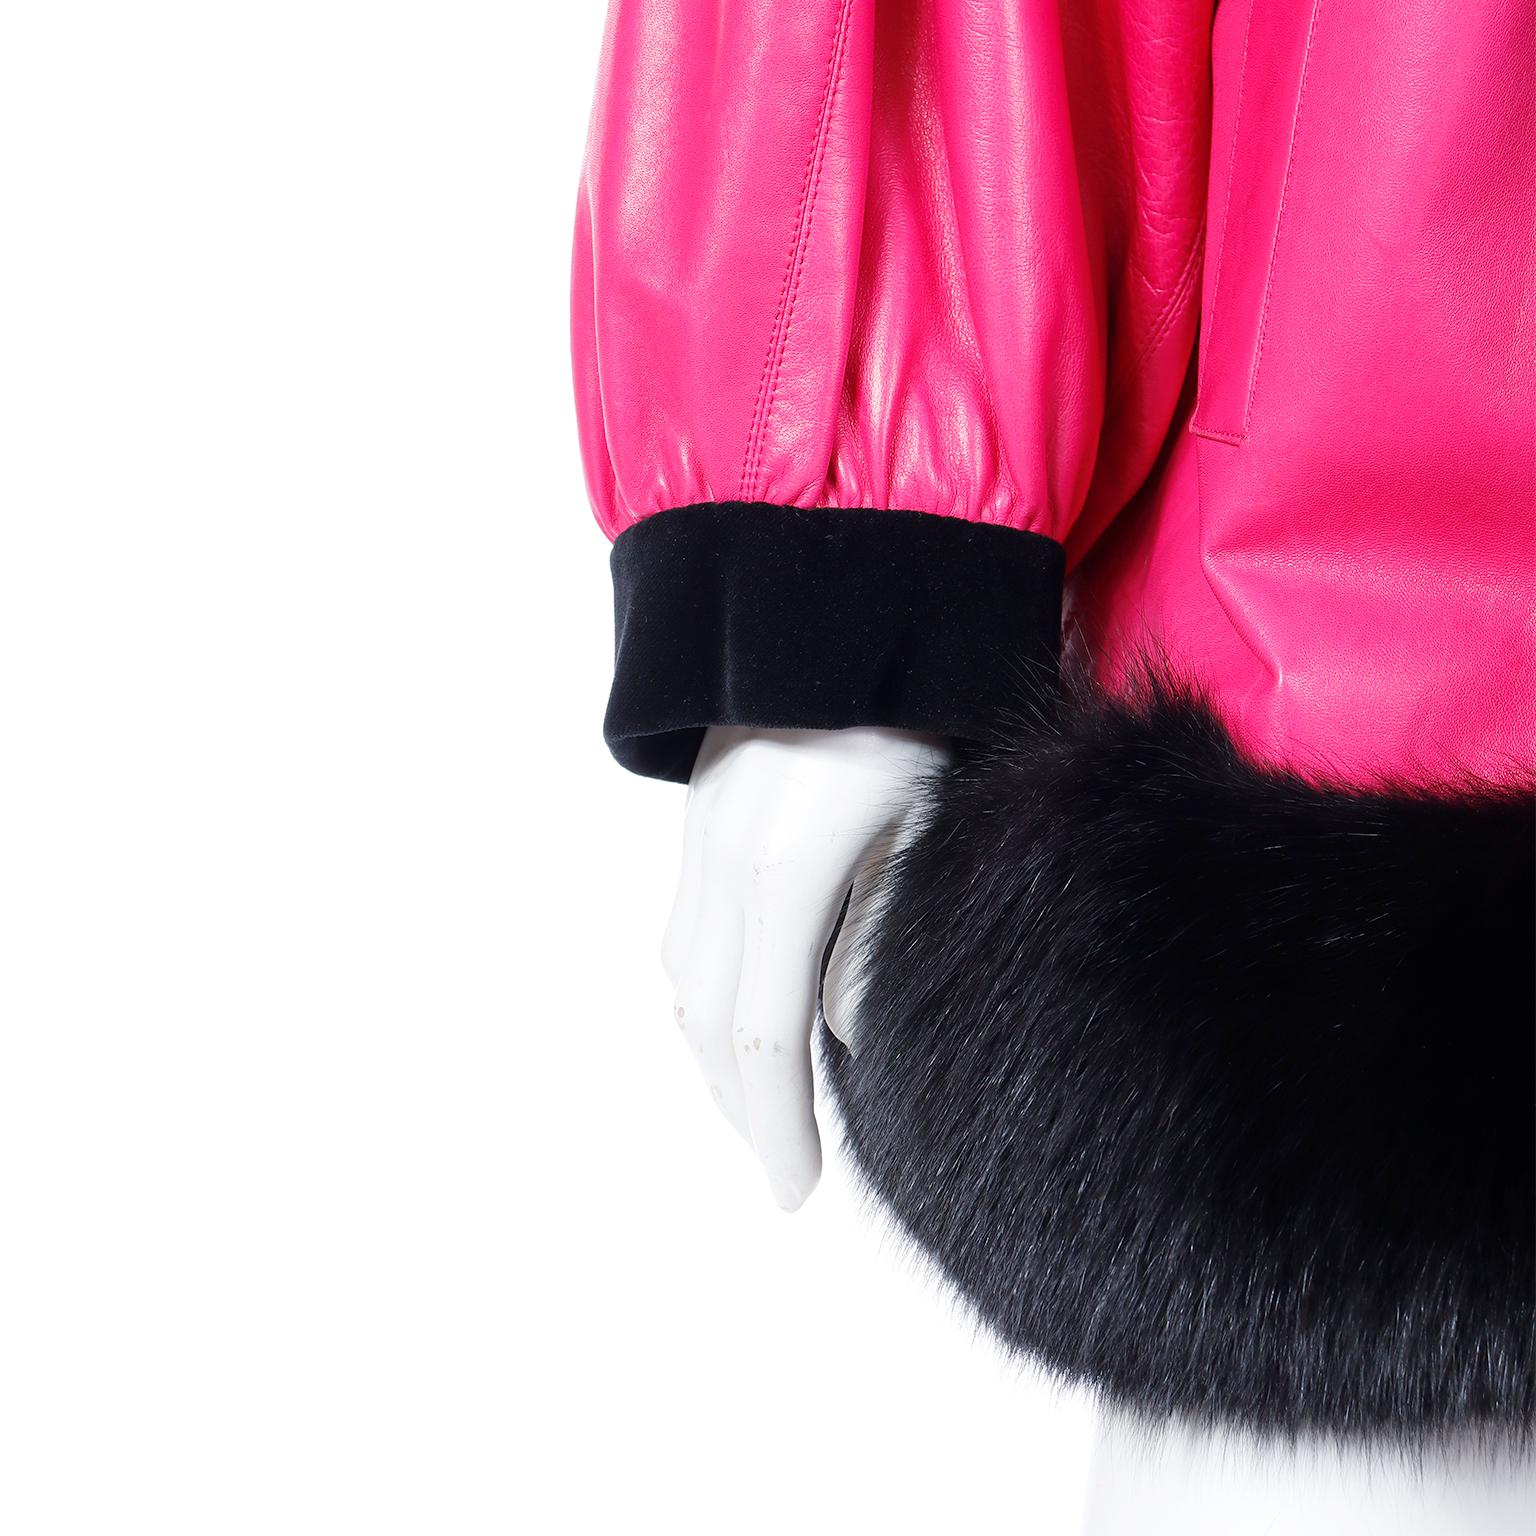 1987 Yves Saint Laurent Runway Haute Couture Pink Leather Jacket w Black Fur For Sale 5